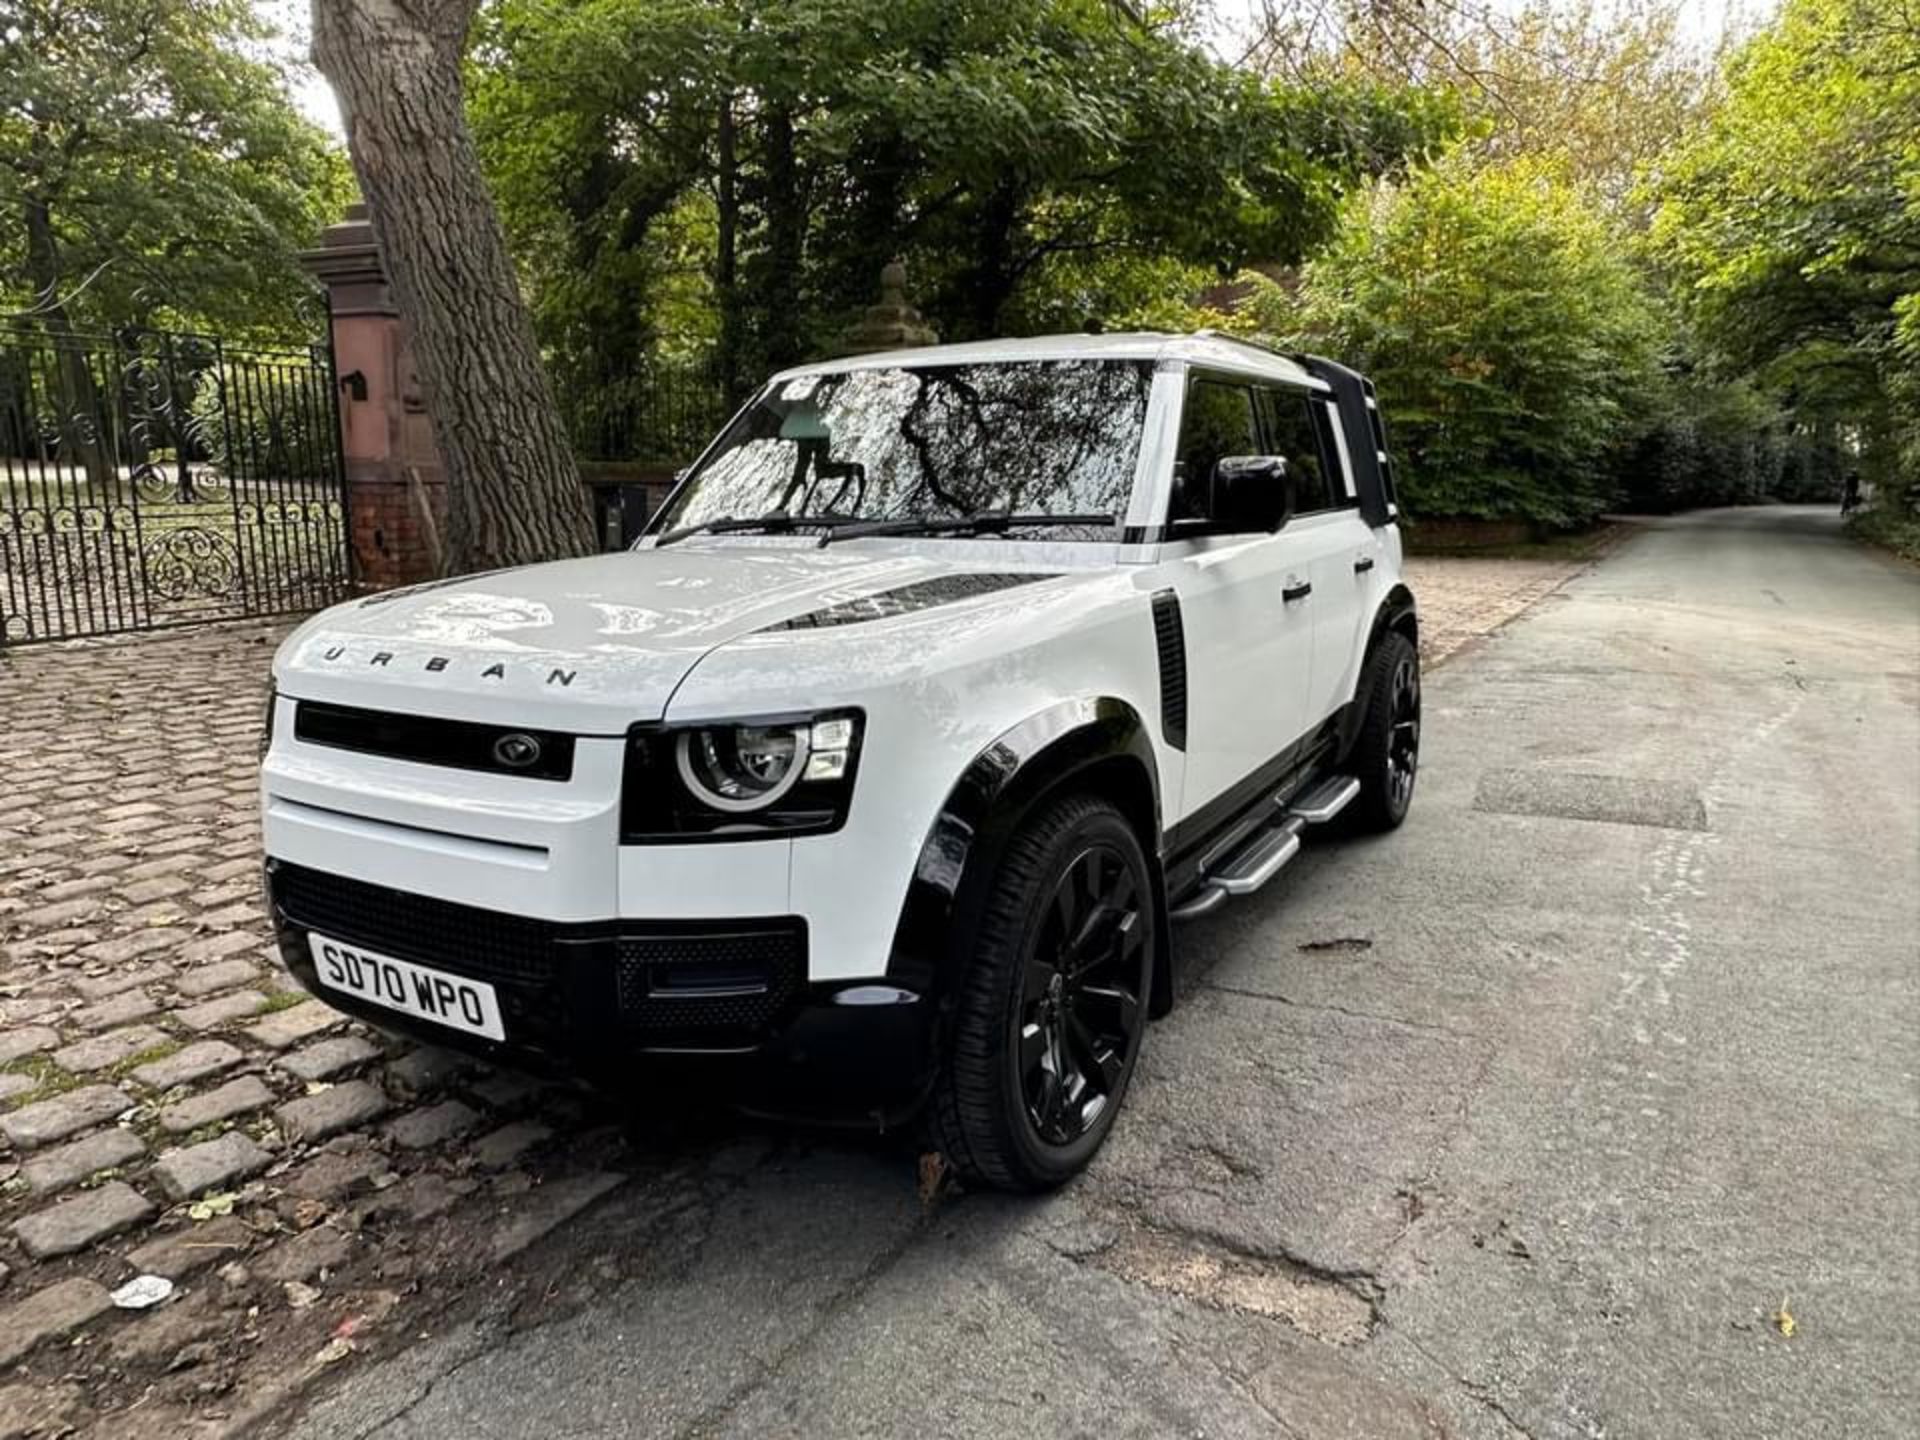 2020/70 REG LAND ROVER DEFENDER 2.0 DIESEL AUTOMATIC, URBAN KITTED - 10K MILES WITH FULL HISTORY - Image 4 of 12